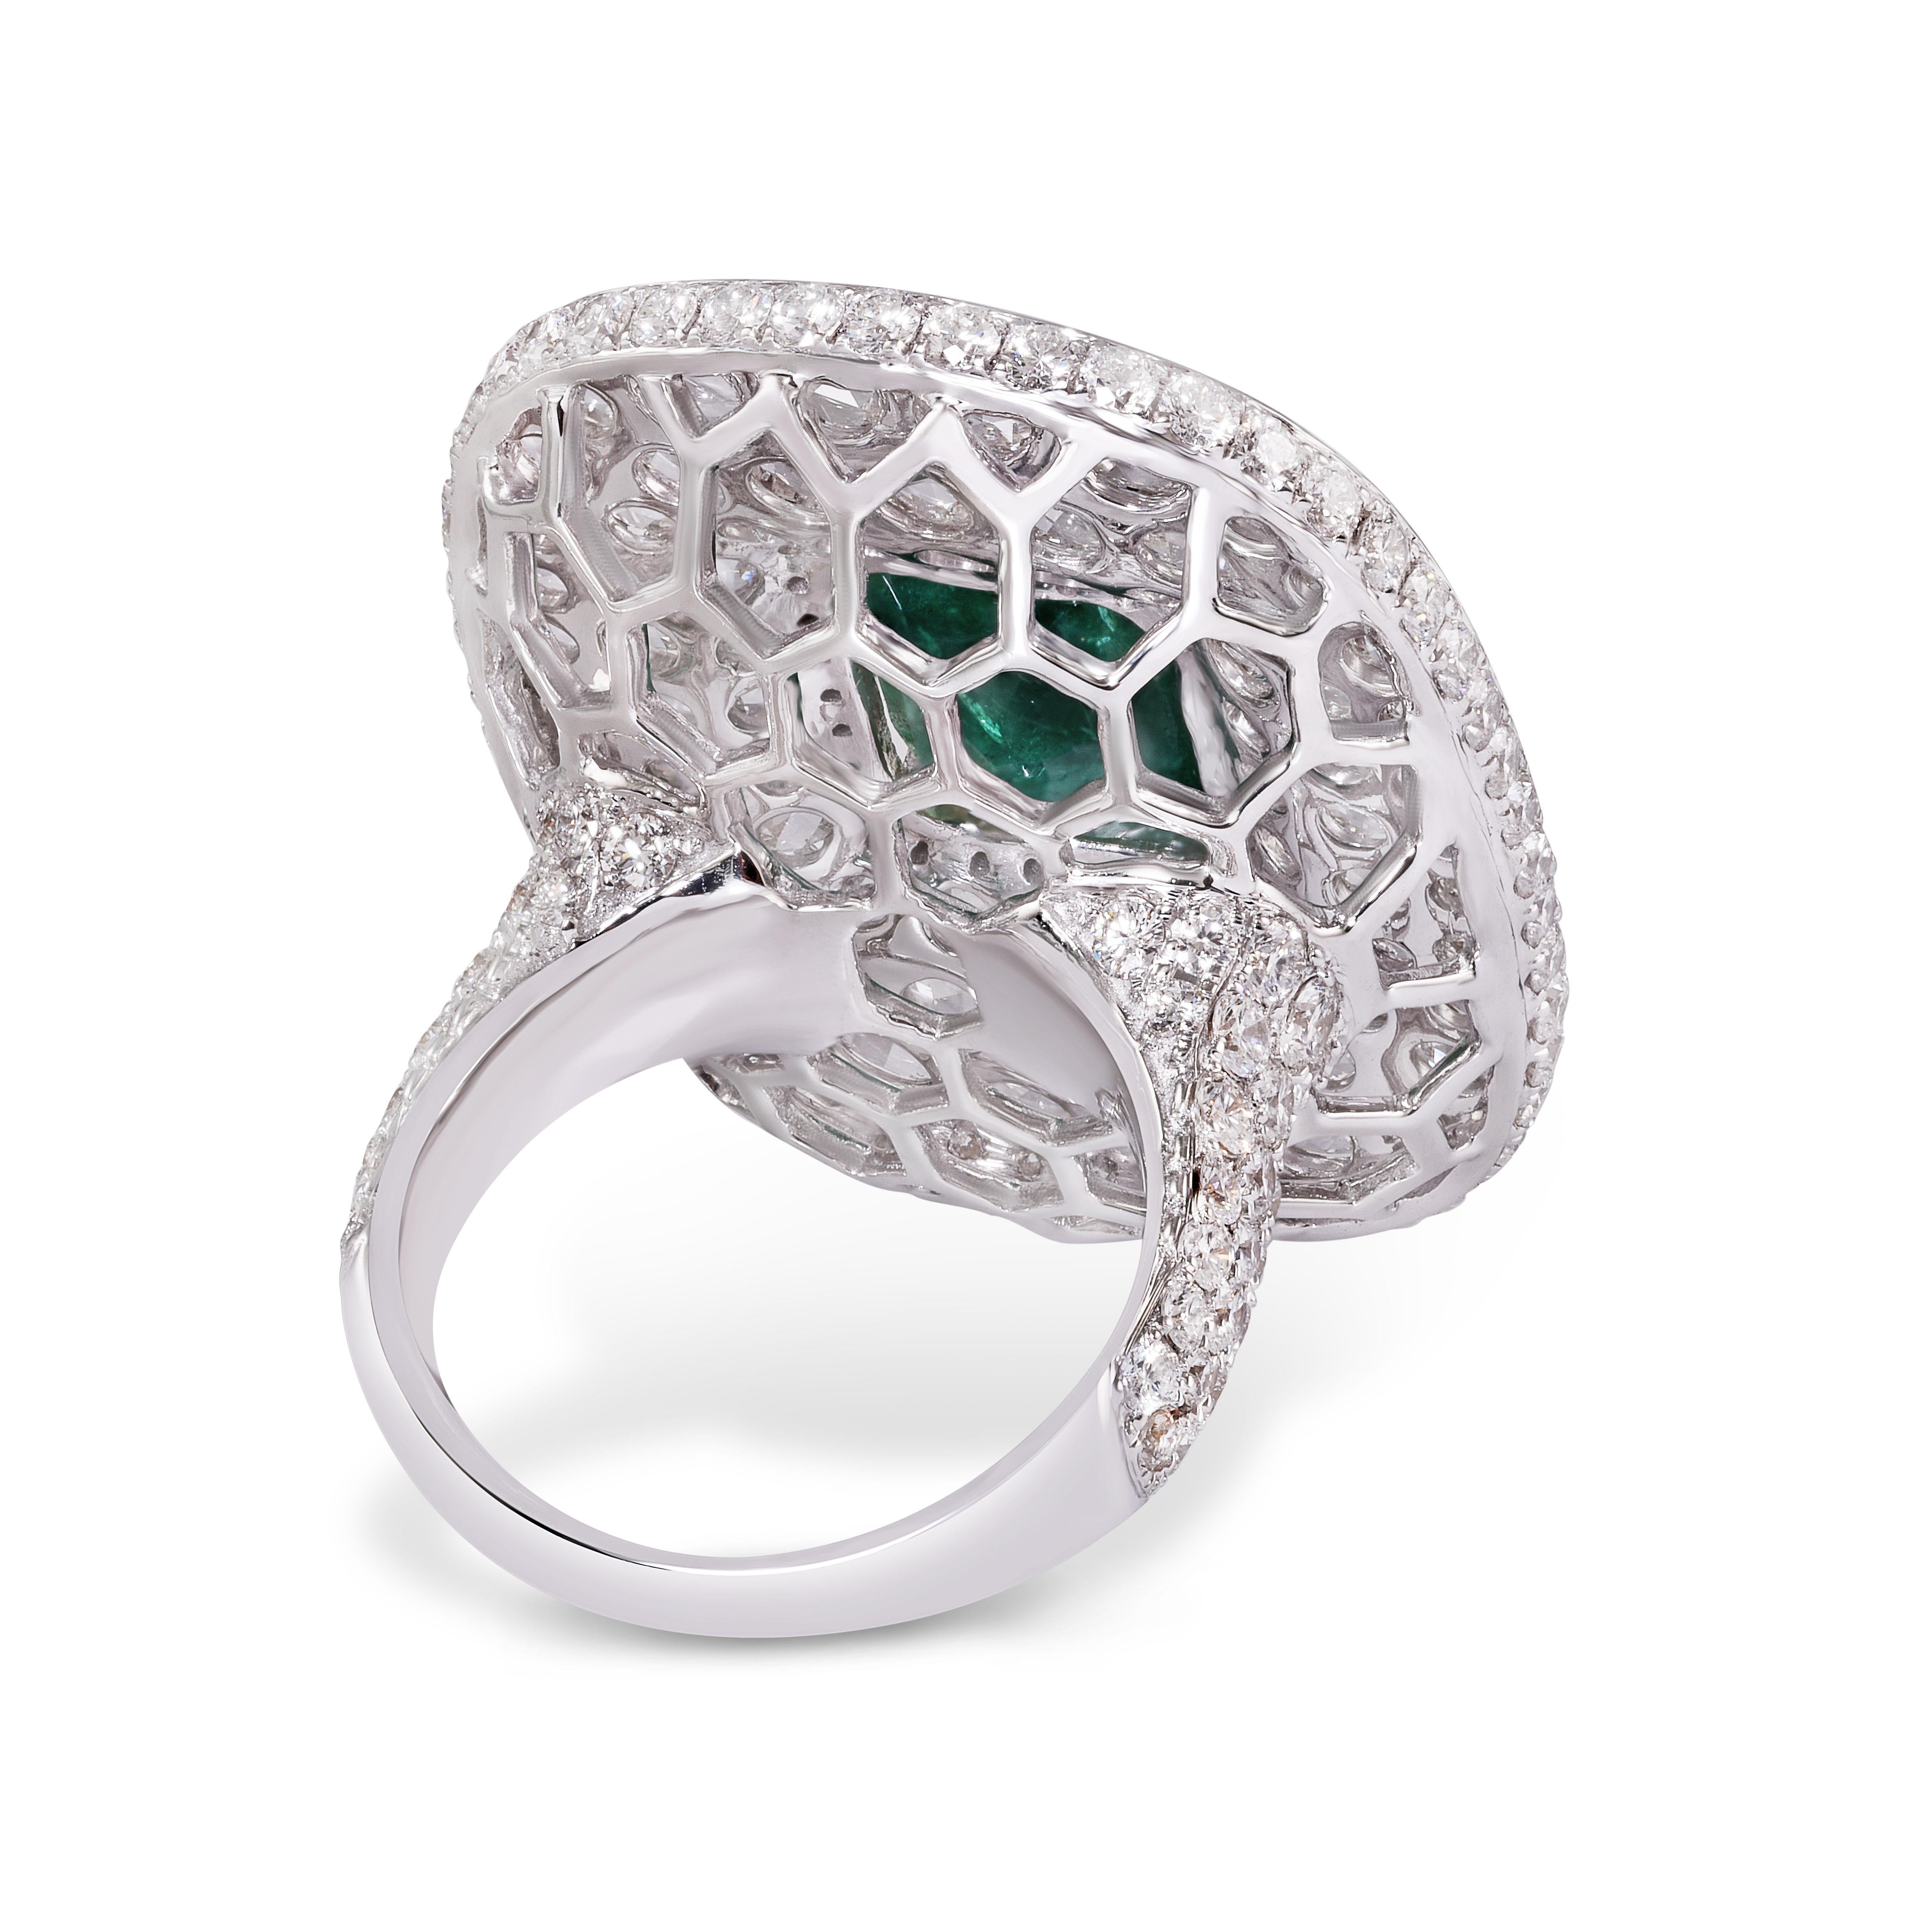 This iconic Rarever ring highlights an untreated, 6.13-carat Zambian emerald, set within a mosaic of rose-cut diamonds. Honouring the traditions of ancient artisans, this ring is handmade from 18-karat white gold and is carefully inlaid with